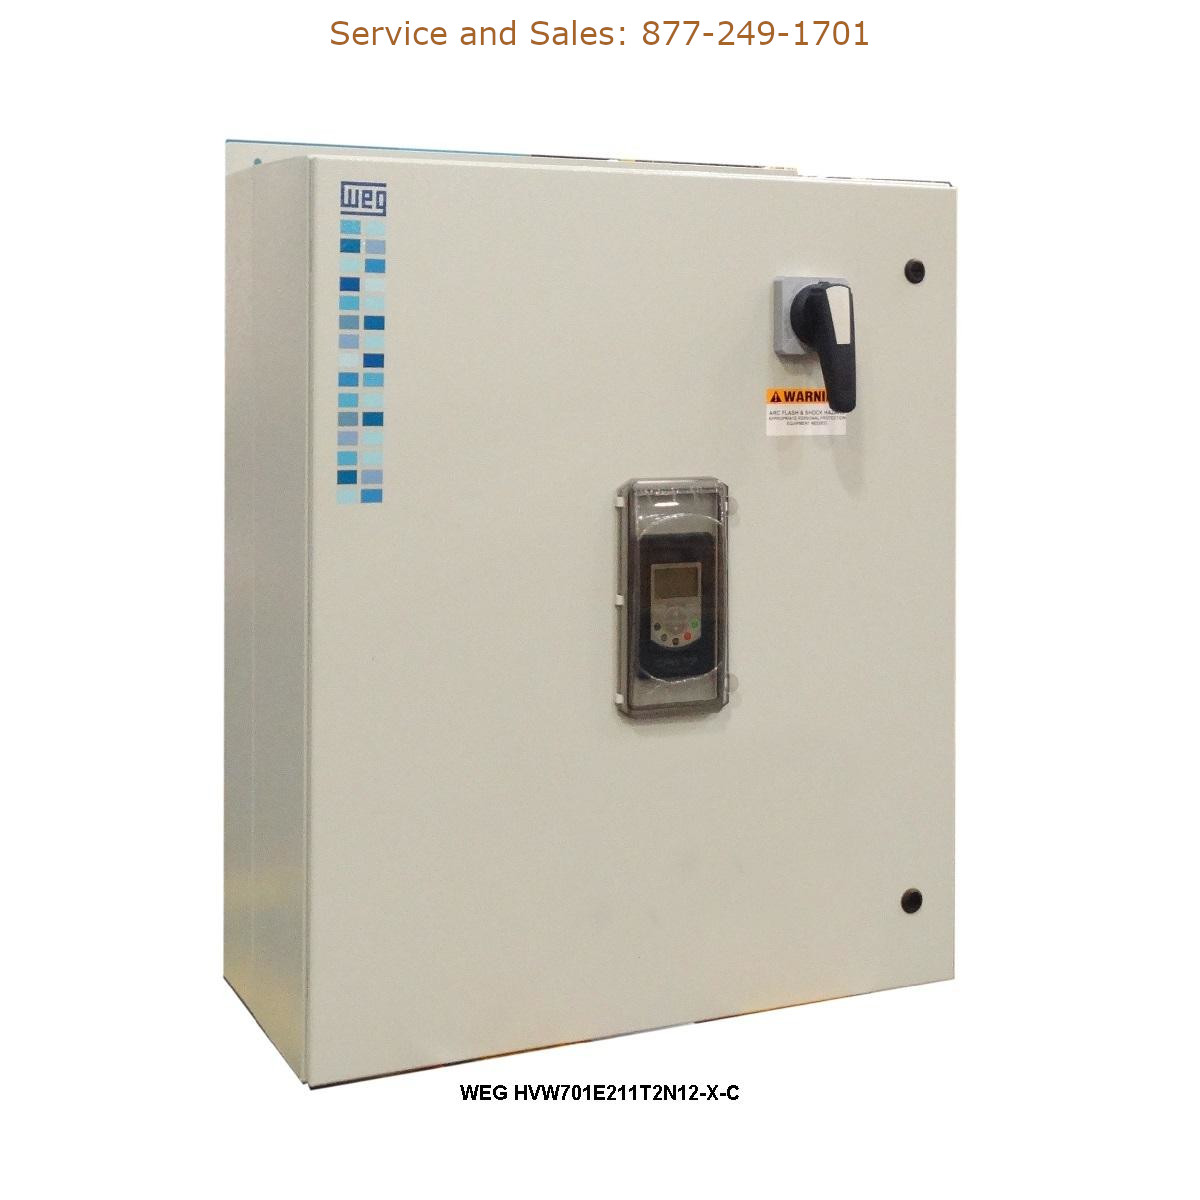 WEG HVW701E211T2N12-X-C WEG Model Number HVW701E211T2N12-X-C WEG Drives, Variable Speed Drives Repair Service, Troubleshooting, Replacement Parts https://gesrepair.com/wp-content/uploads/2022/WEG/WEG_HVW701E211T2N12-X-C_Drives_Variable_Speed_Drives.jpg